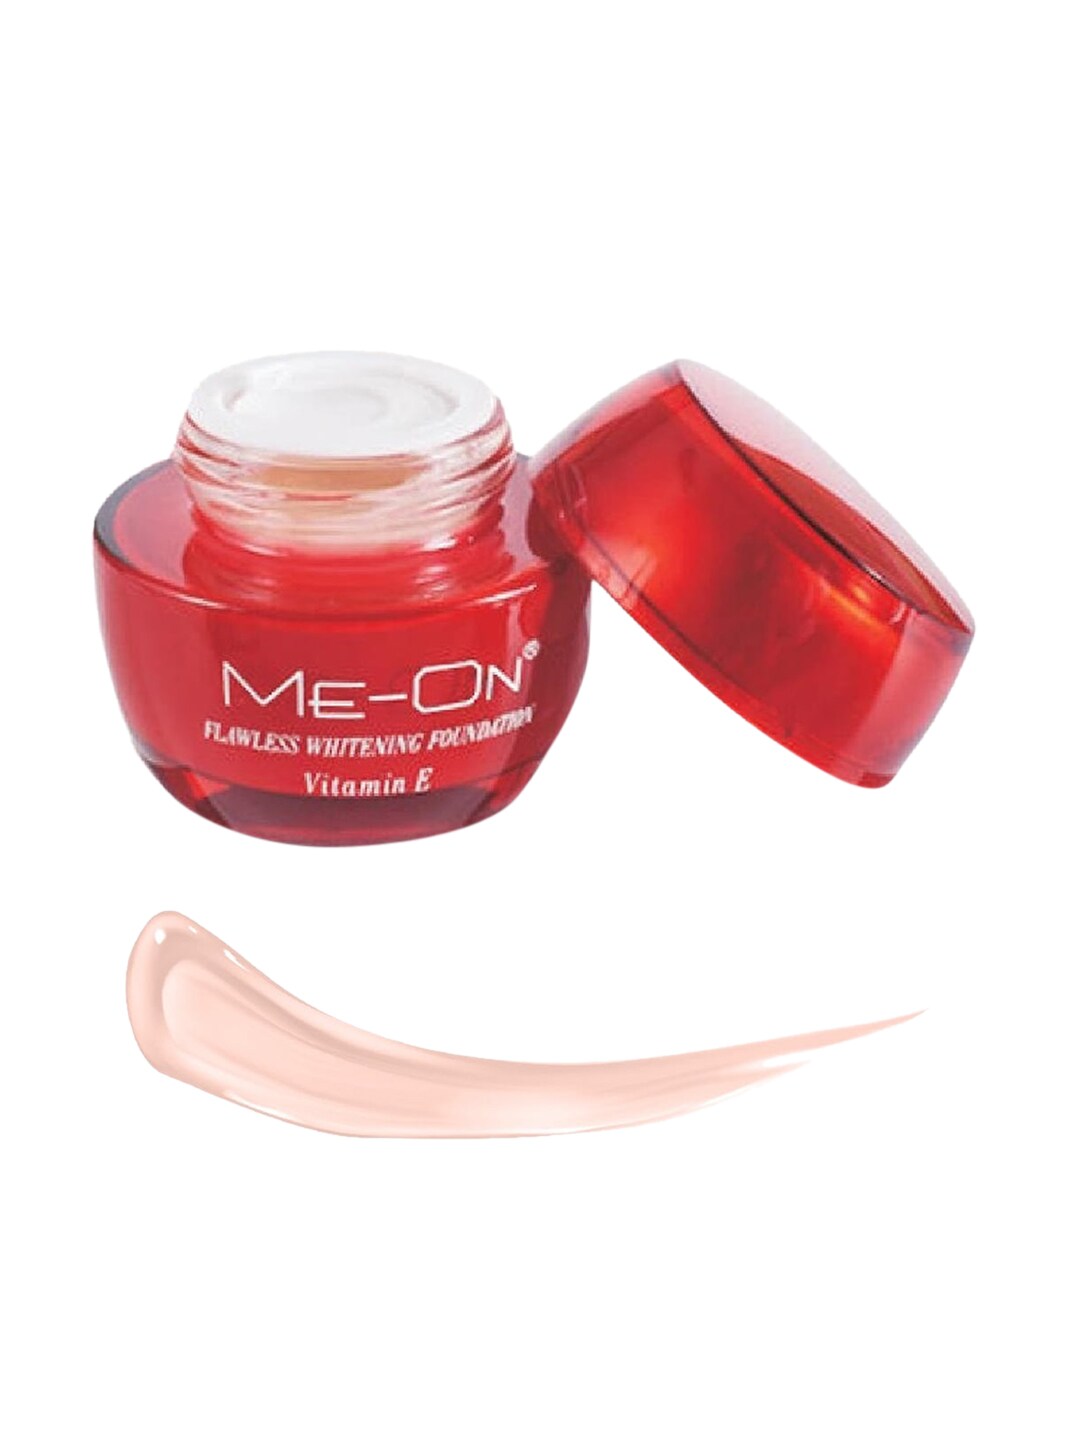 ME-ON Whitening Foundation - Shade 02 Price in India